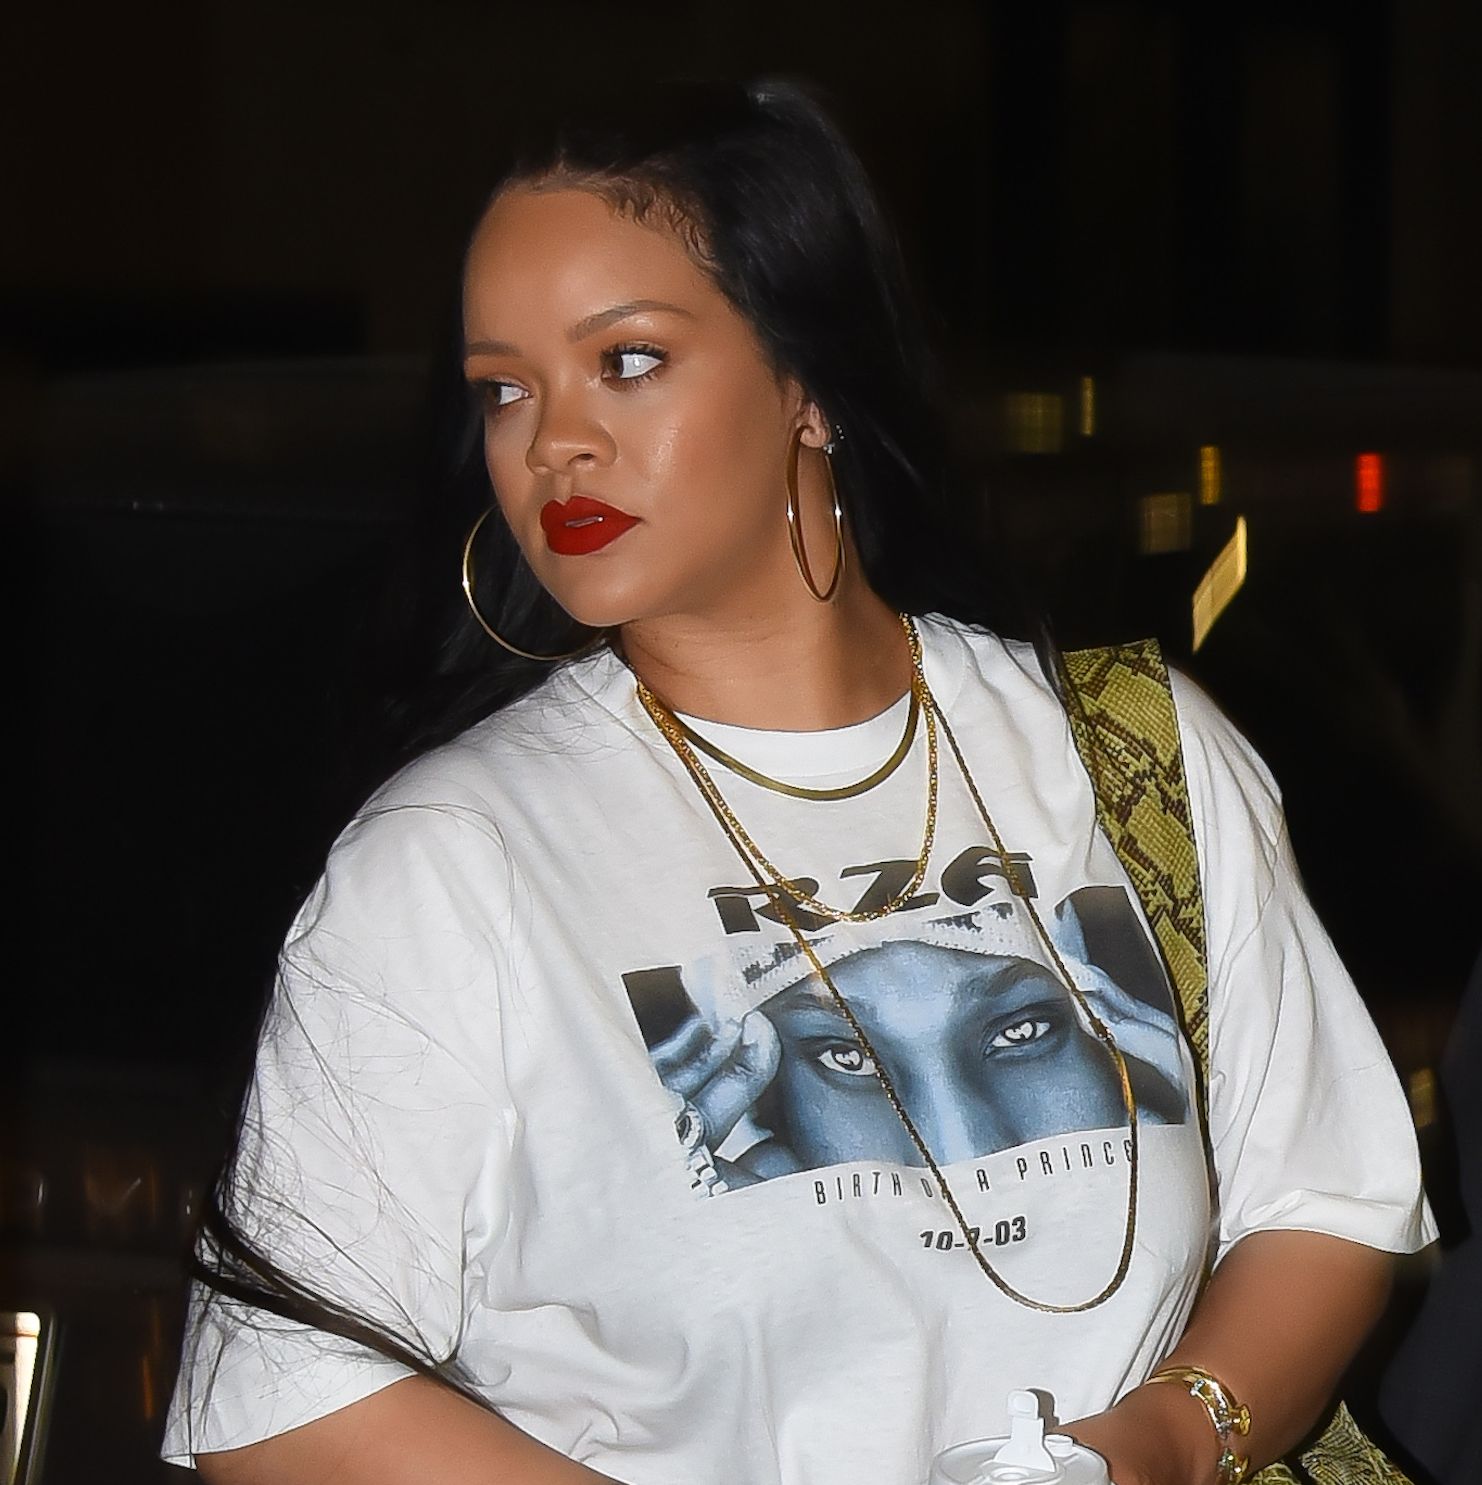 Rihanna Stopped to Help Restaurant Staff Clean Up After Girl's Night Out